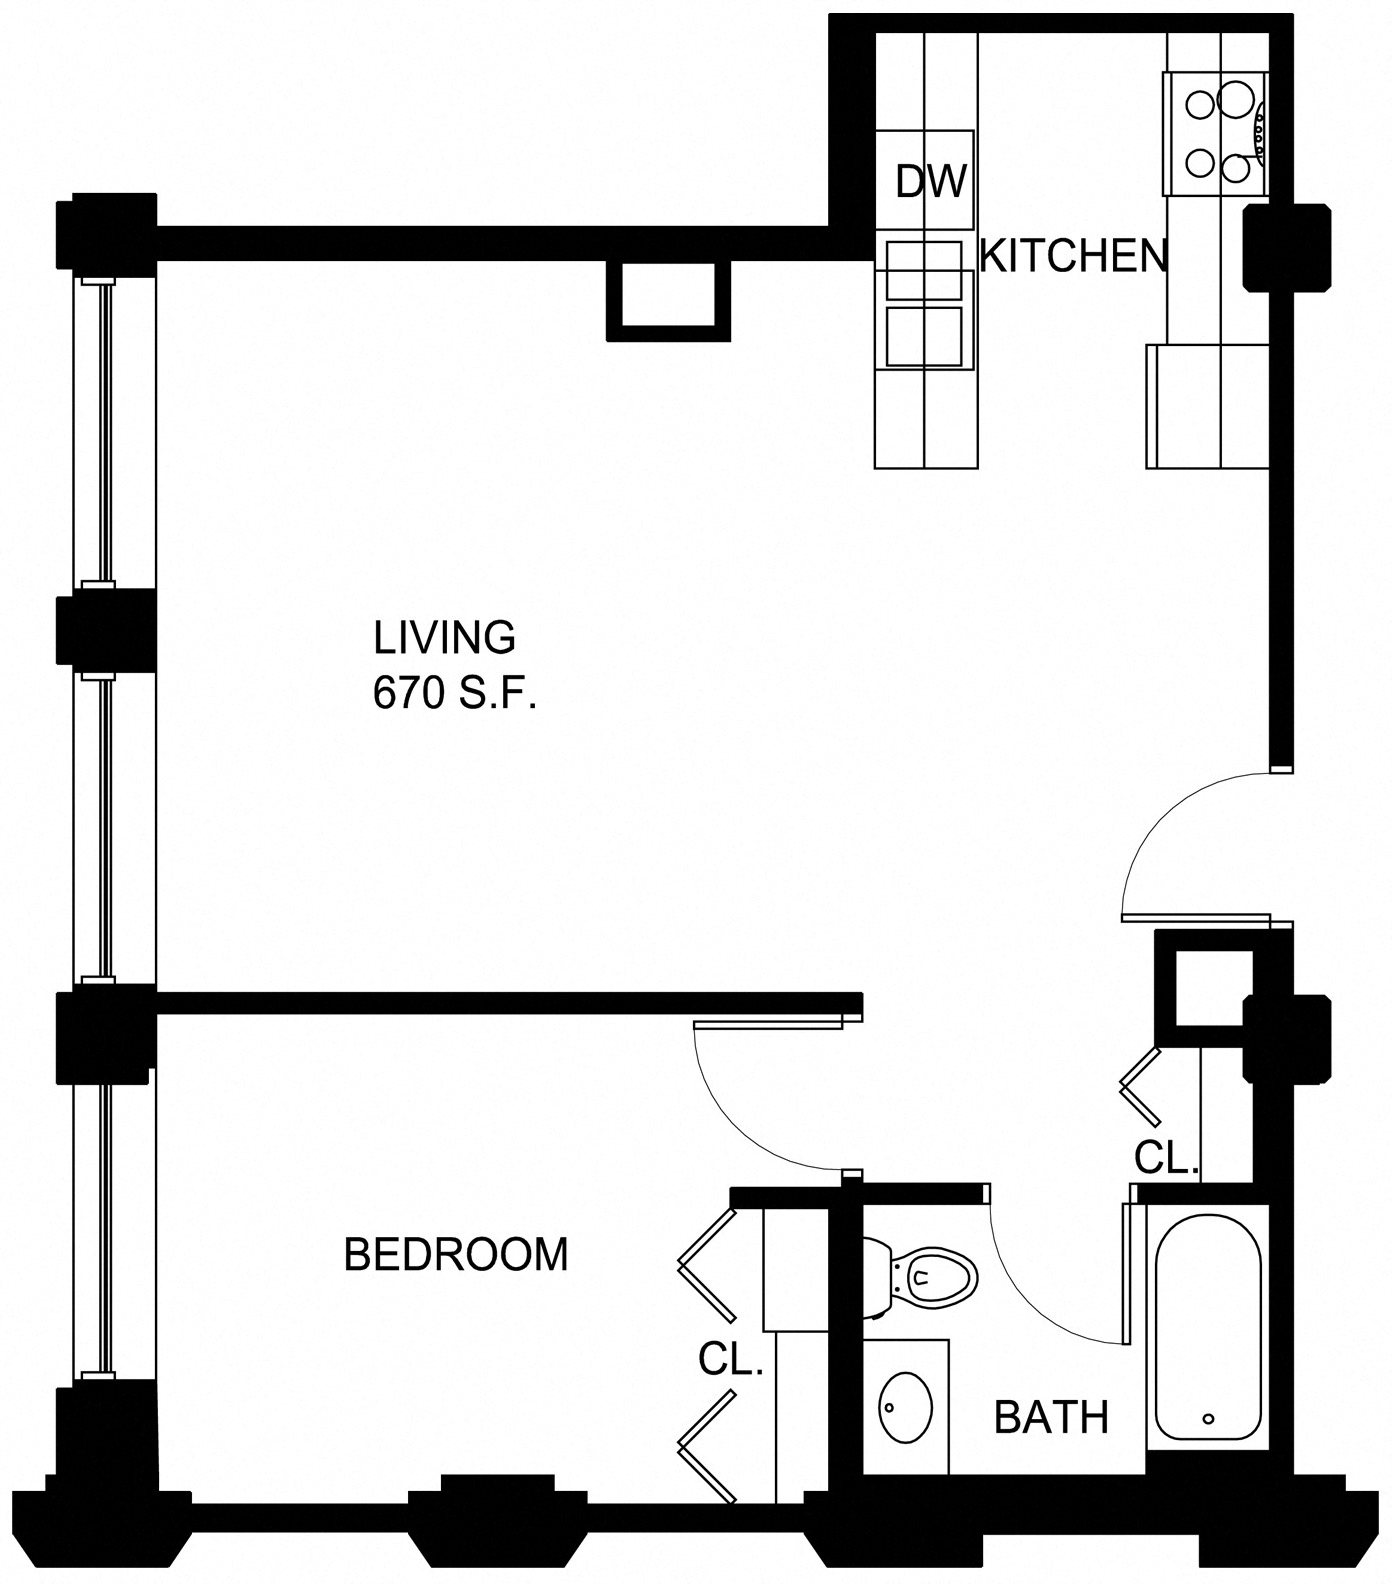 Floorplan for Apartment #P238, 1 bedroom unit at Halstead Providence